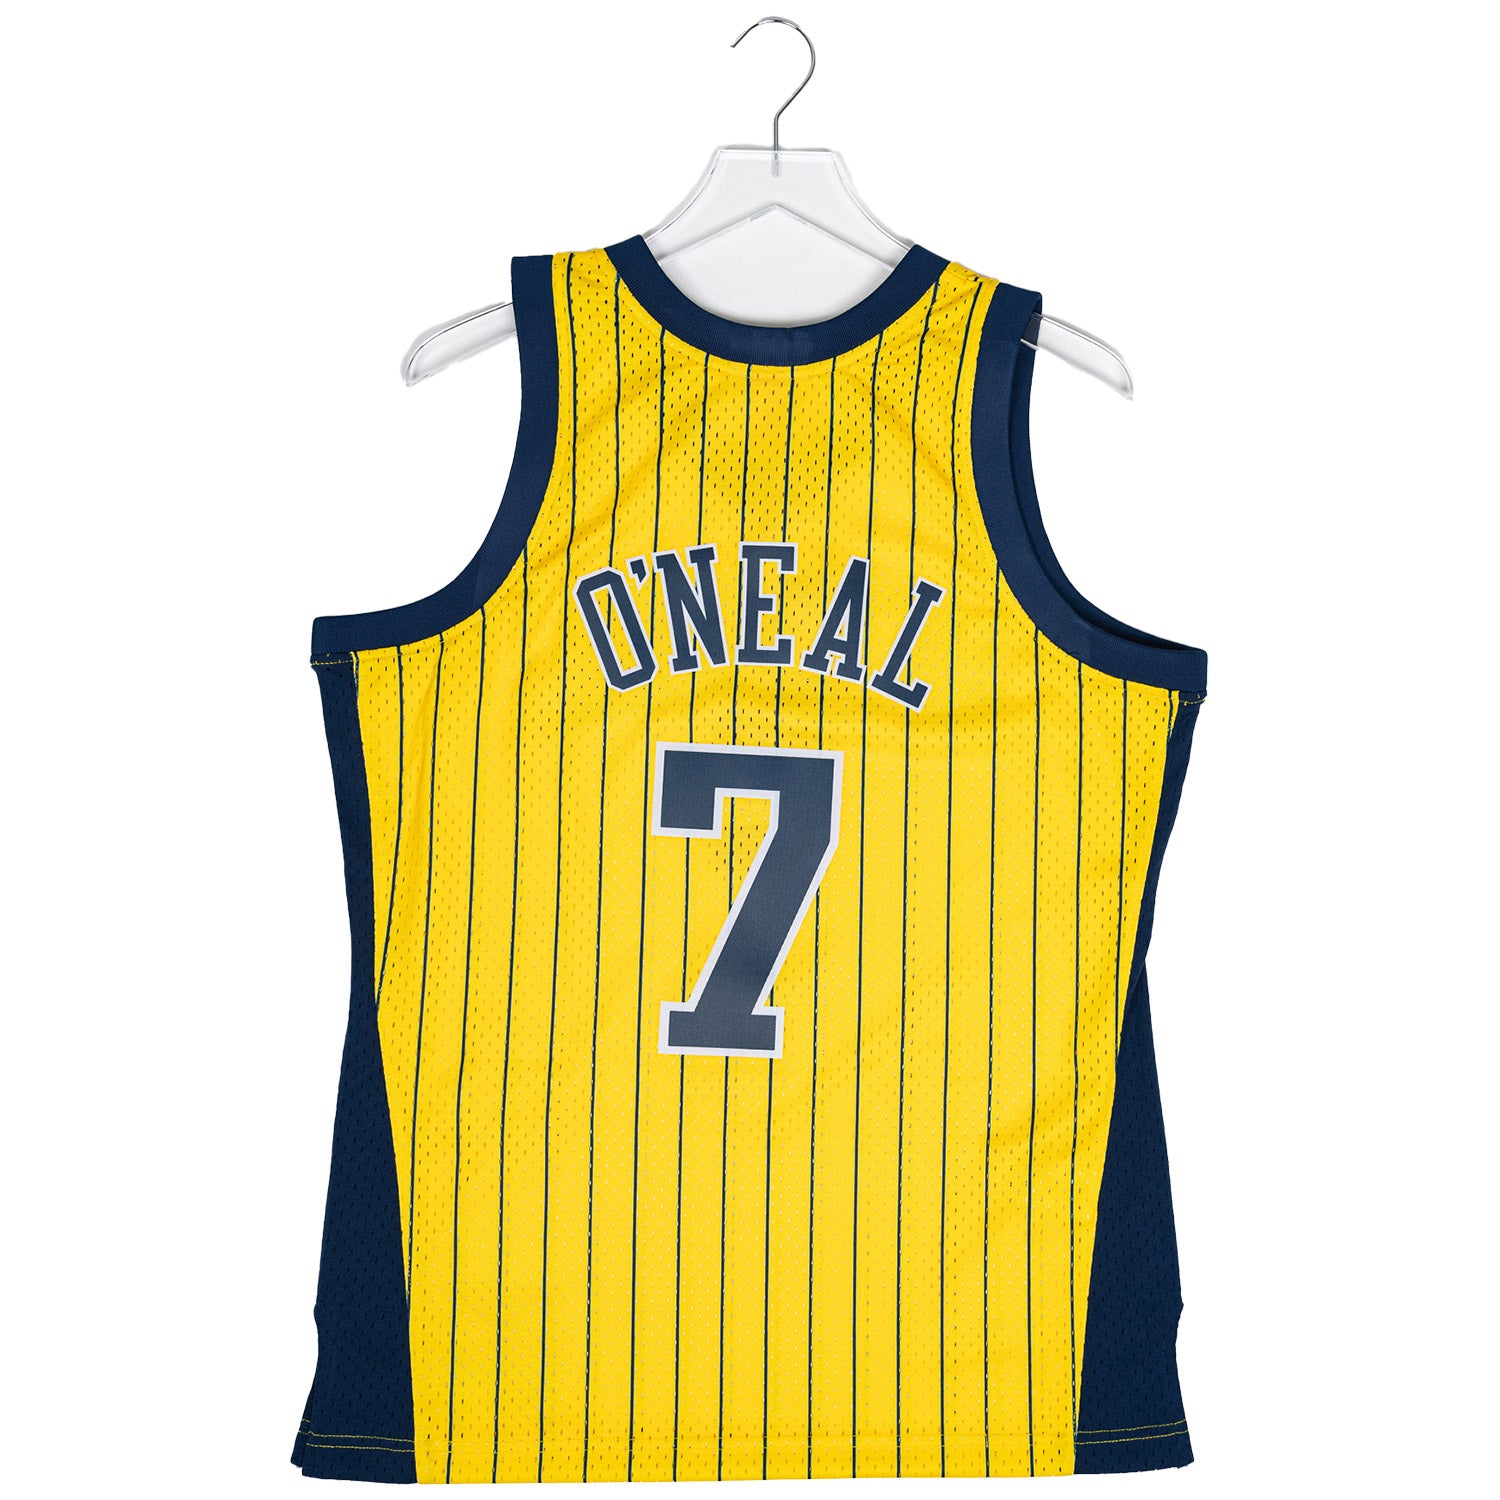 Pacers small forward jersey